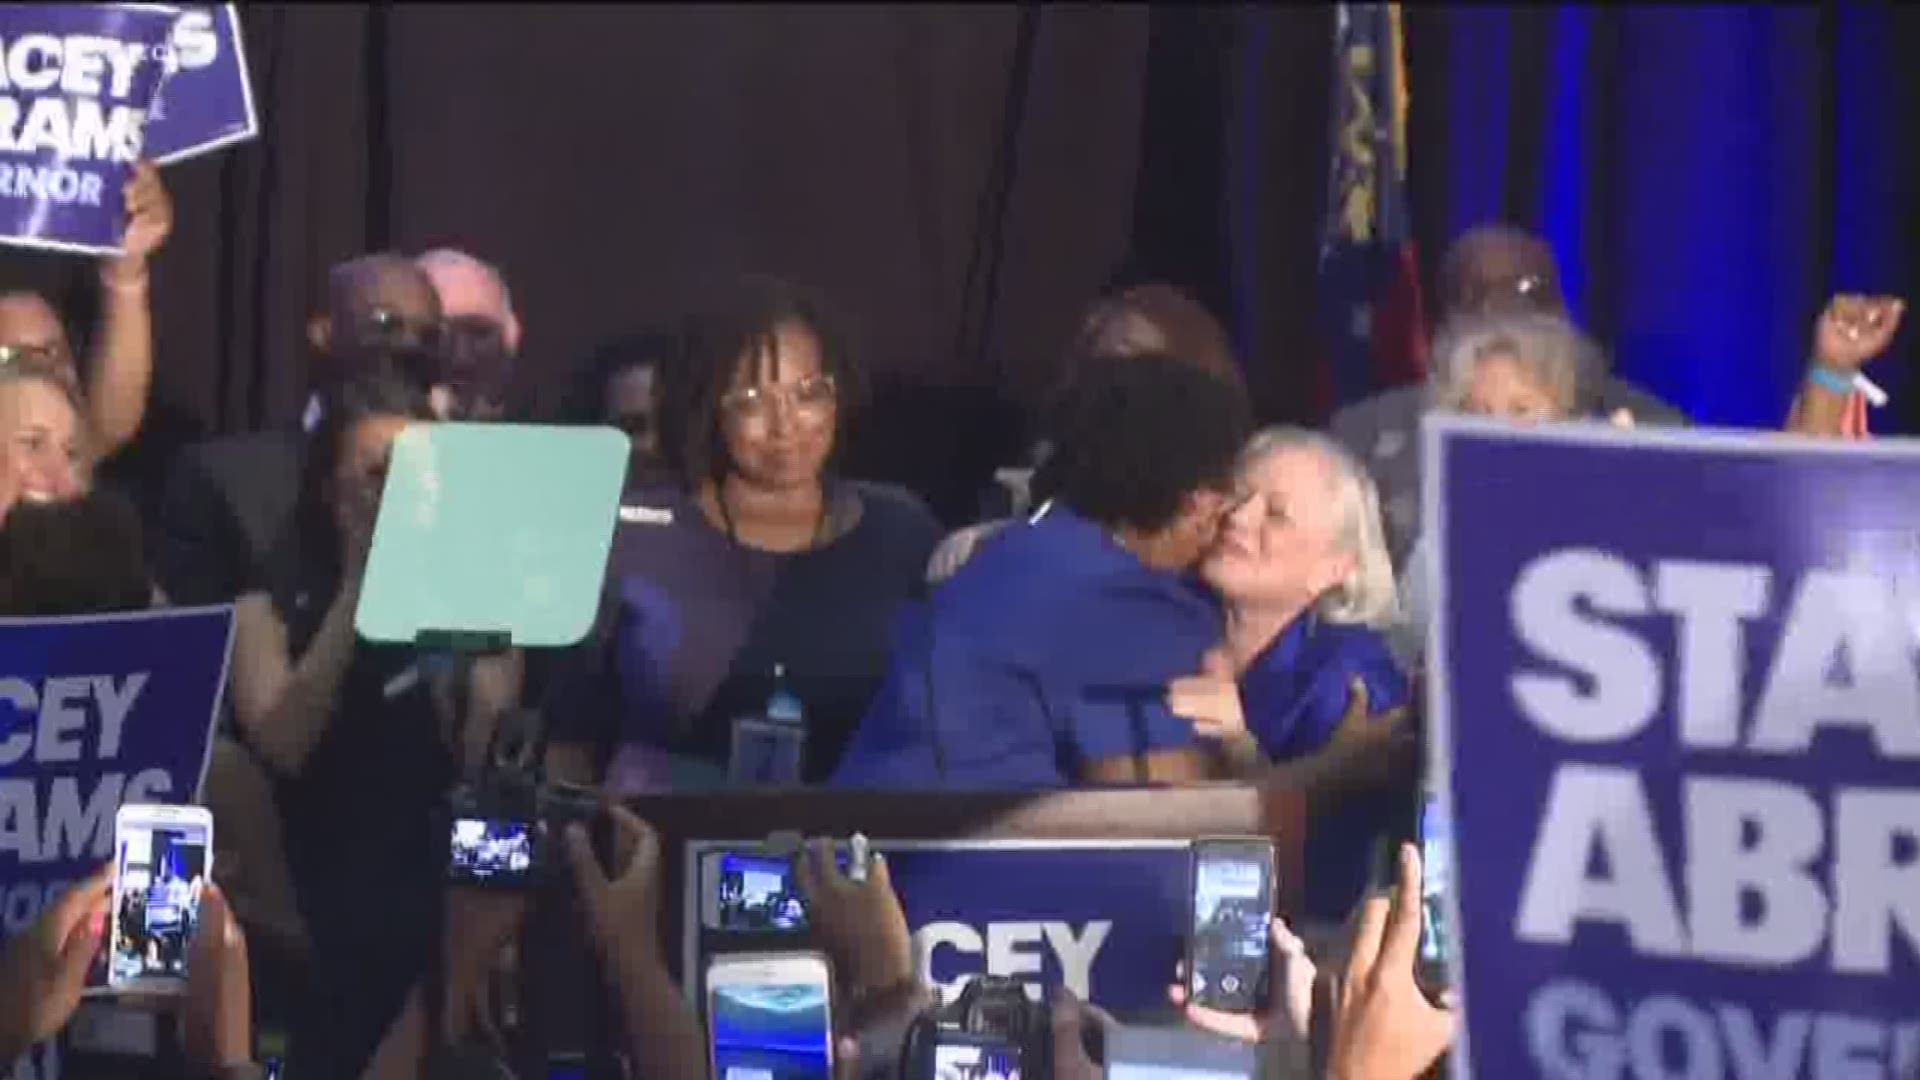 It's a historic victory for Stacey Abrams.